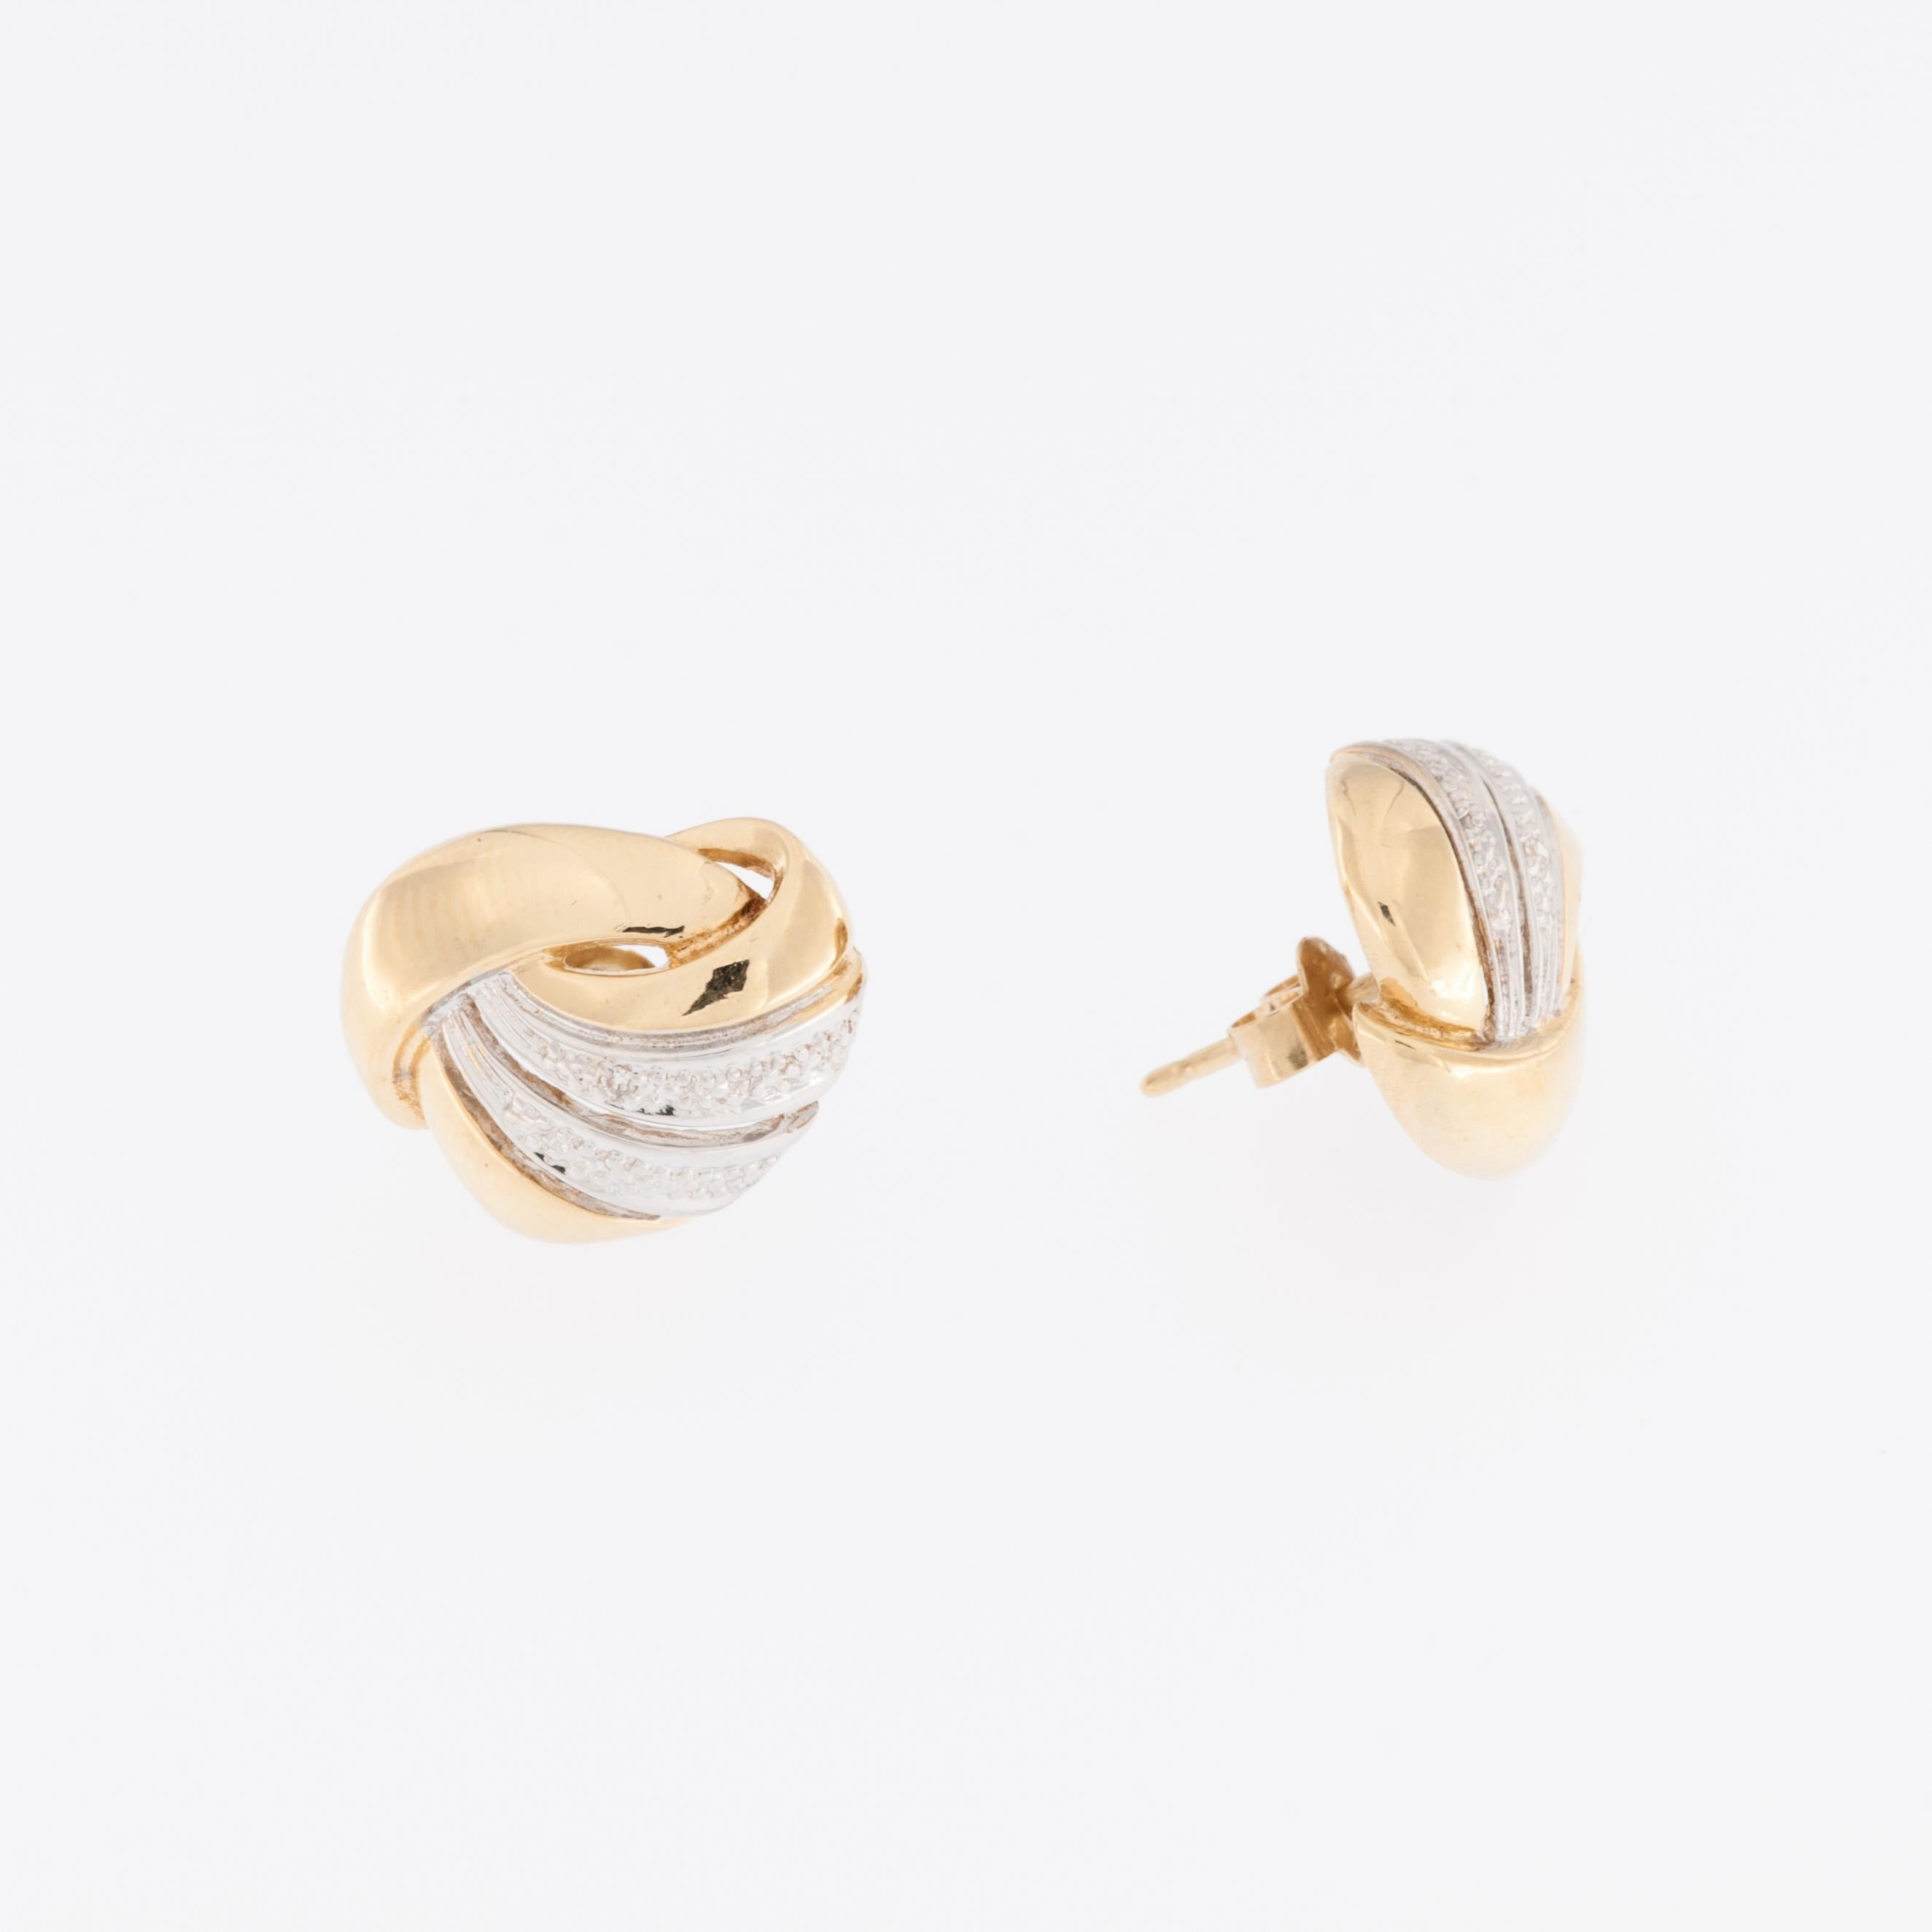 Vintage Belgian 18kt Gold Earrings with Diamonds, Yellow Gold, and White Gold:

These exquisite vintage earrings are a testament to timeless elegance and craftsmanship. Crafted in Belgium, they are a stunning example of fine jewelry from a bygone